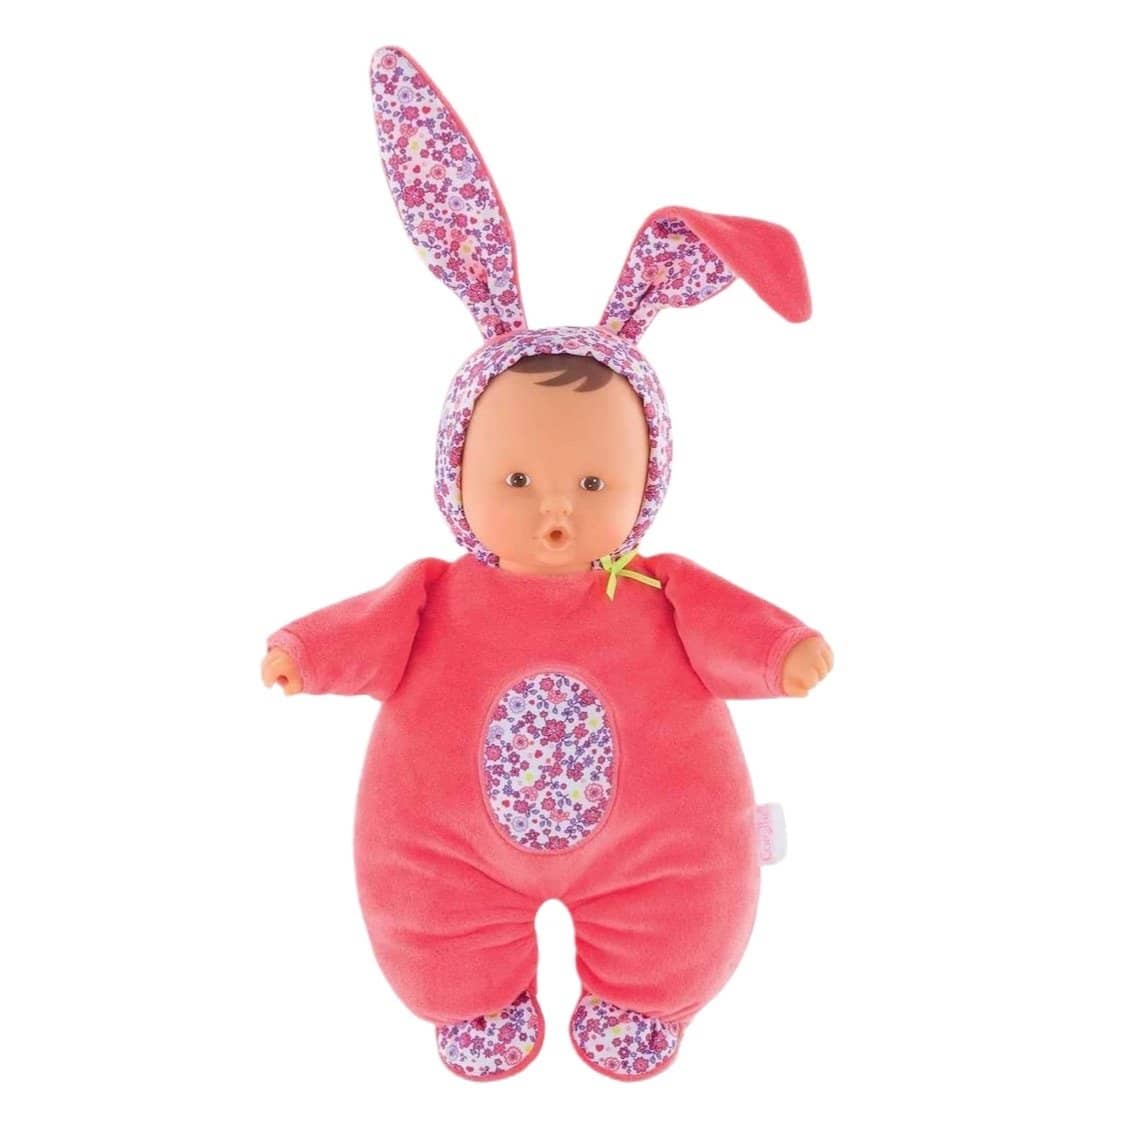 Babibunny 2-In-1 Musical Baby Doll & Nightlight - Corolle Mon Doudou - Floral Bloom-Kidding Around NYC